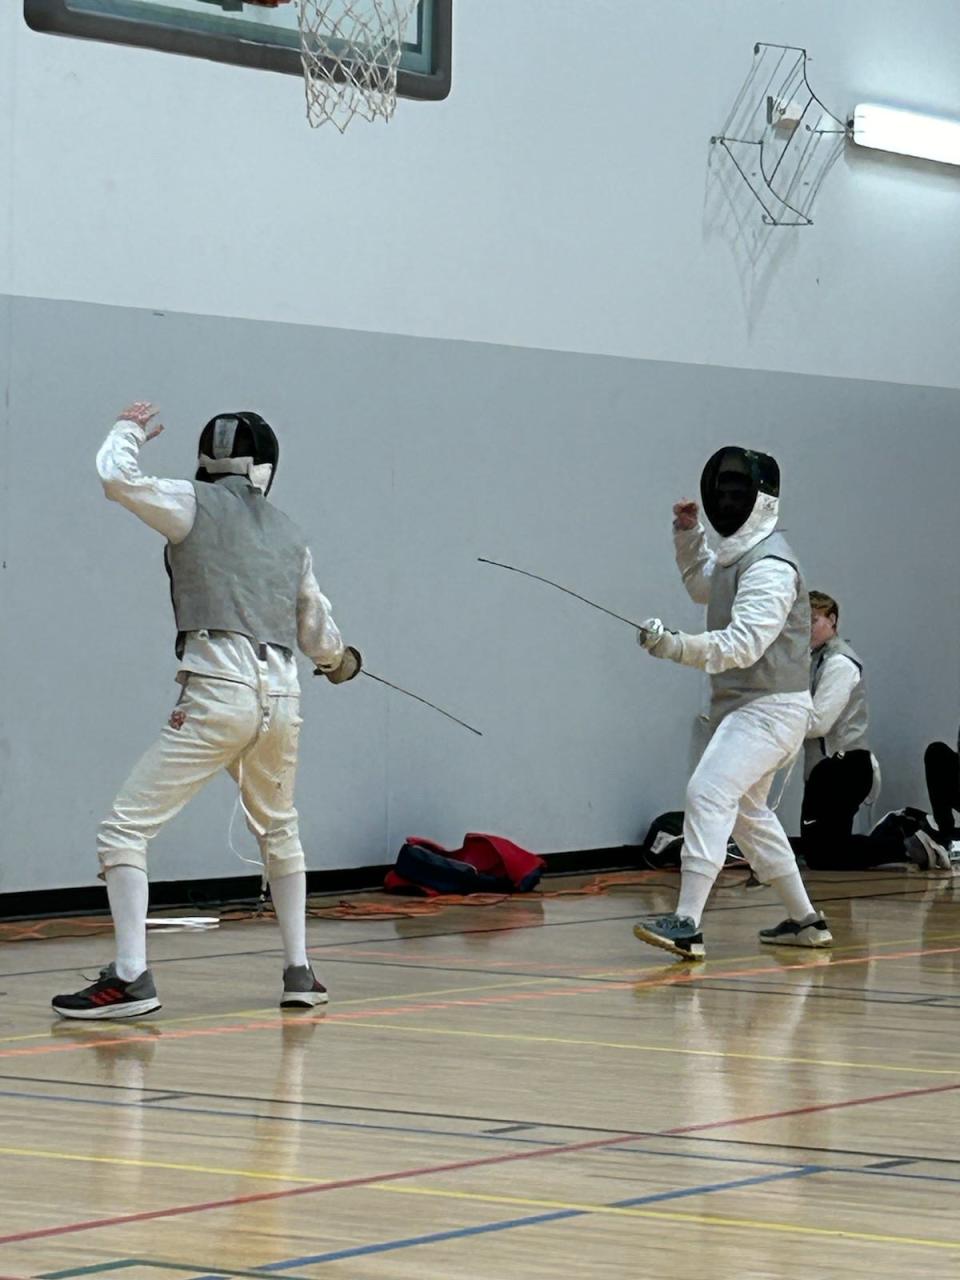 Reisman Berg, left, faces Jeremiah Levis in a fencing match. Berg and Levis are both part of the Cornerstone Classical School fencing program, which brought the sport back to Salina after a nearly decade-long absence in the community.